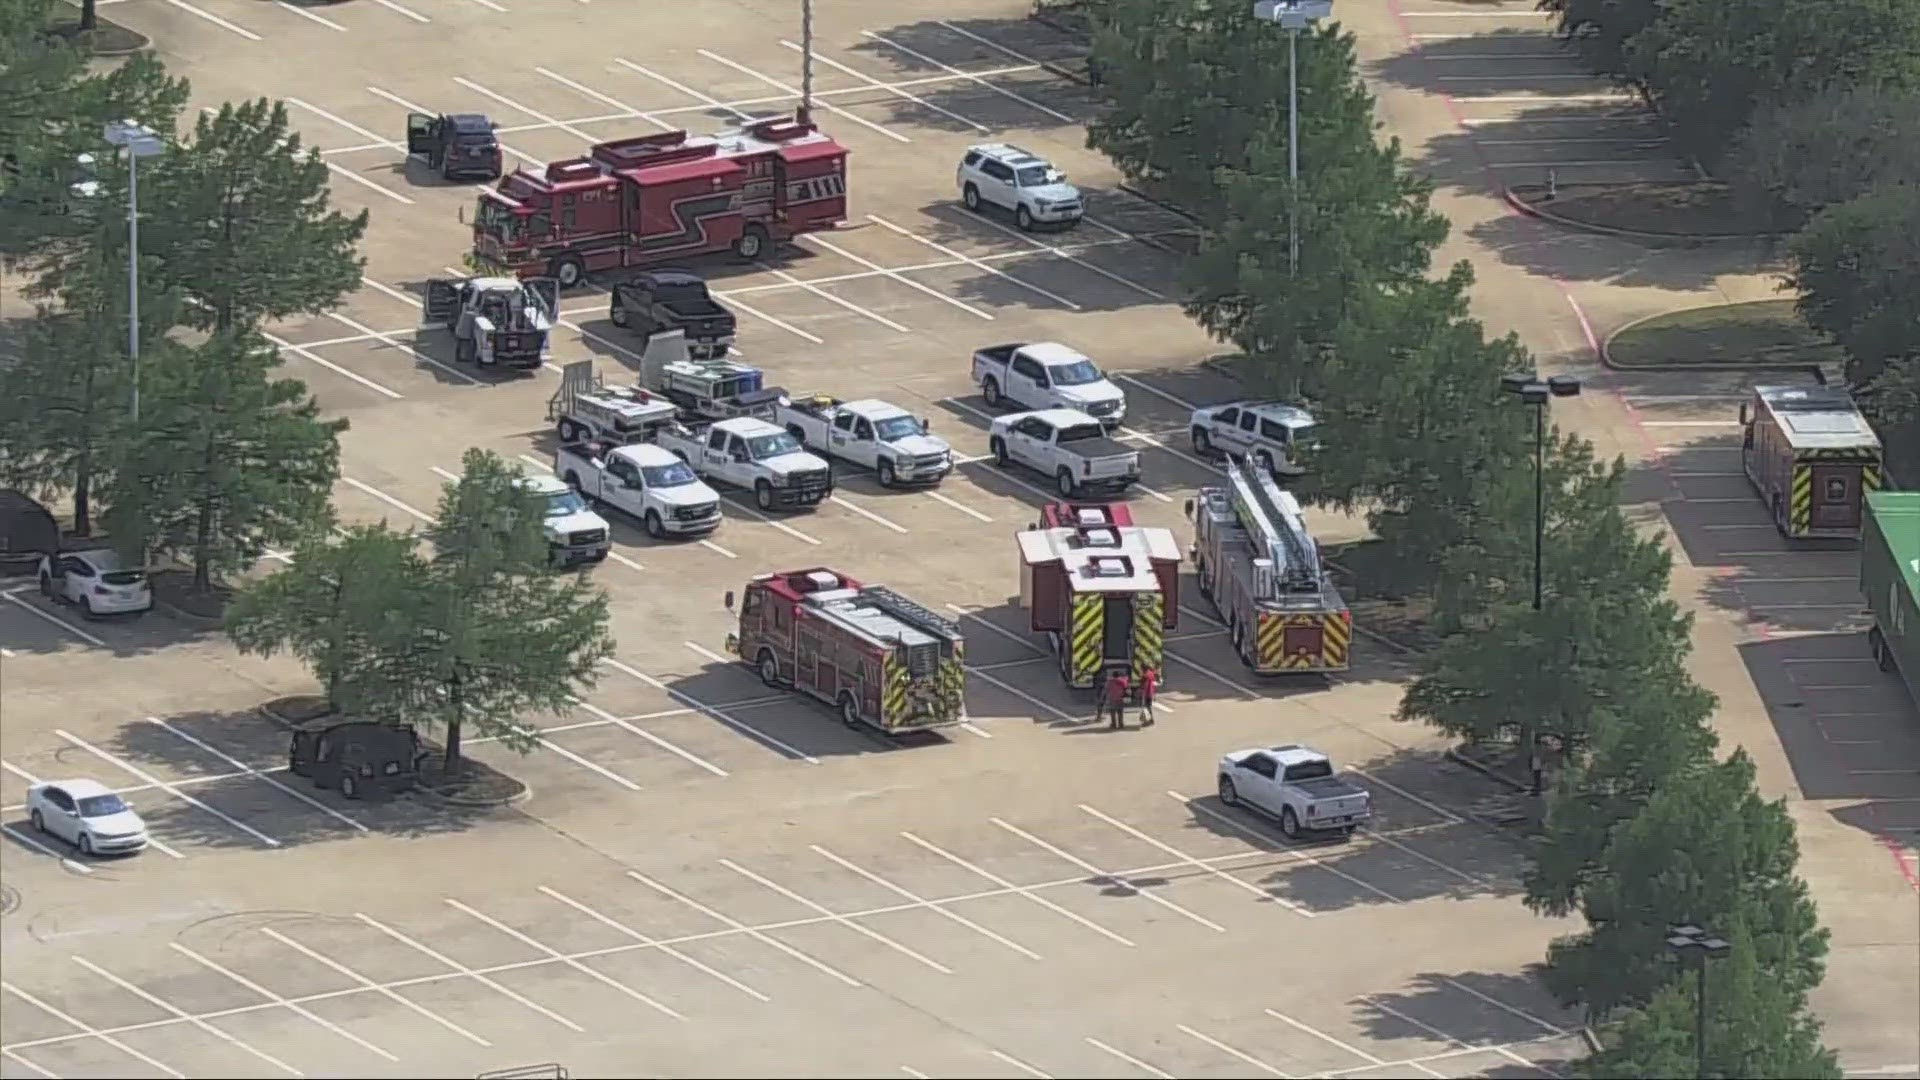 According to officials, crews began responding around 1:30 p.m. Friday after a call from a restaurant about a strong smell of gasoline.